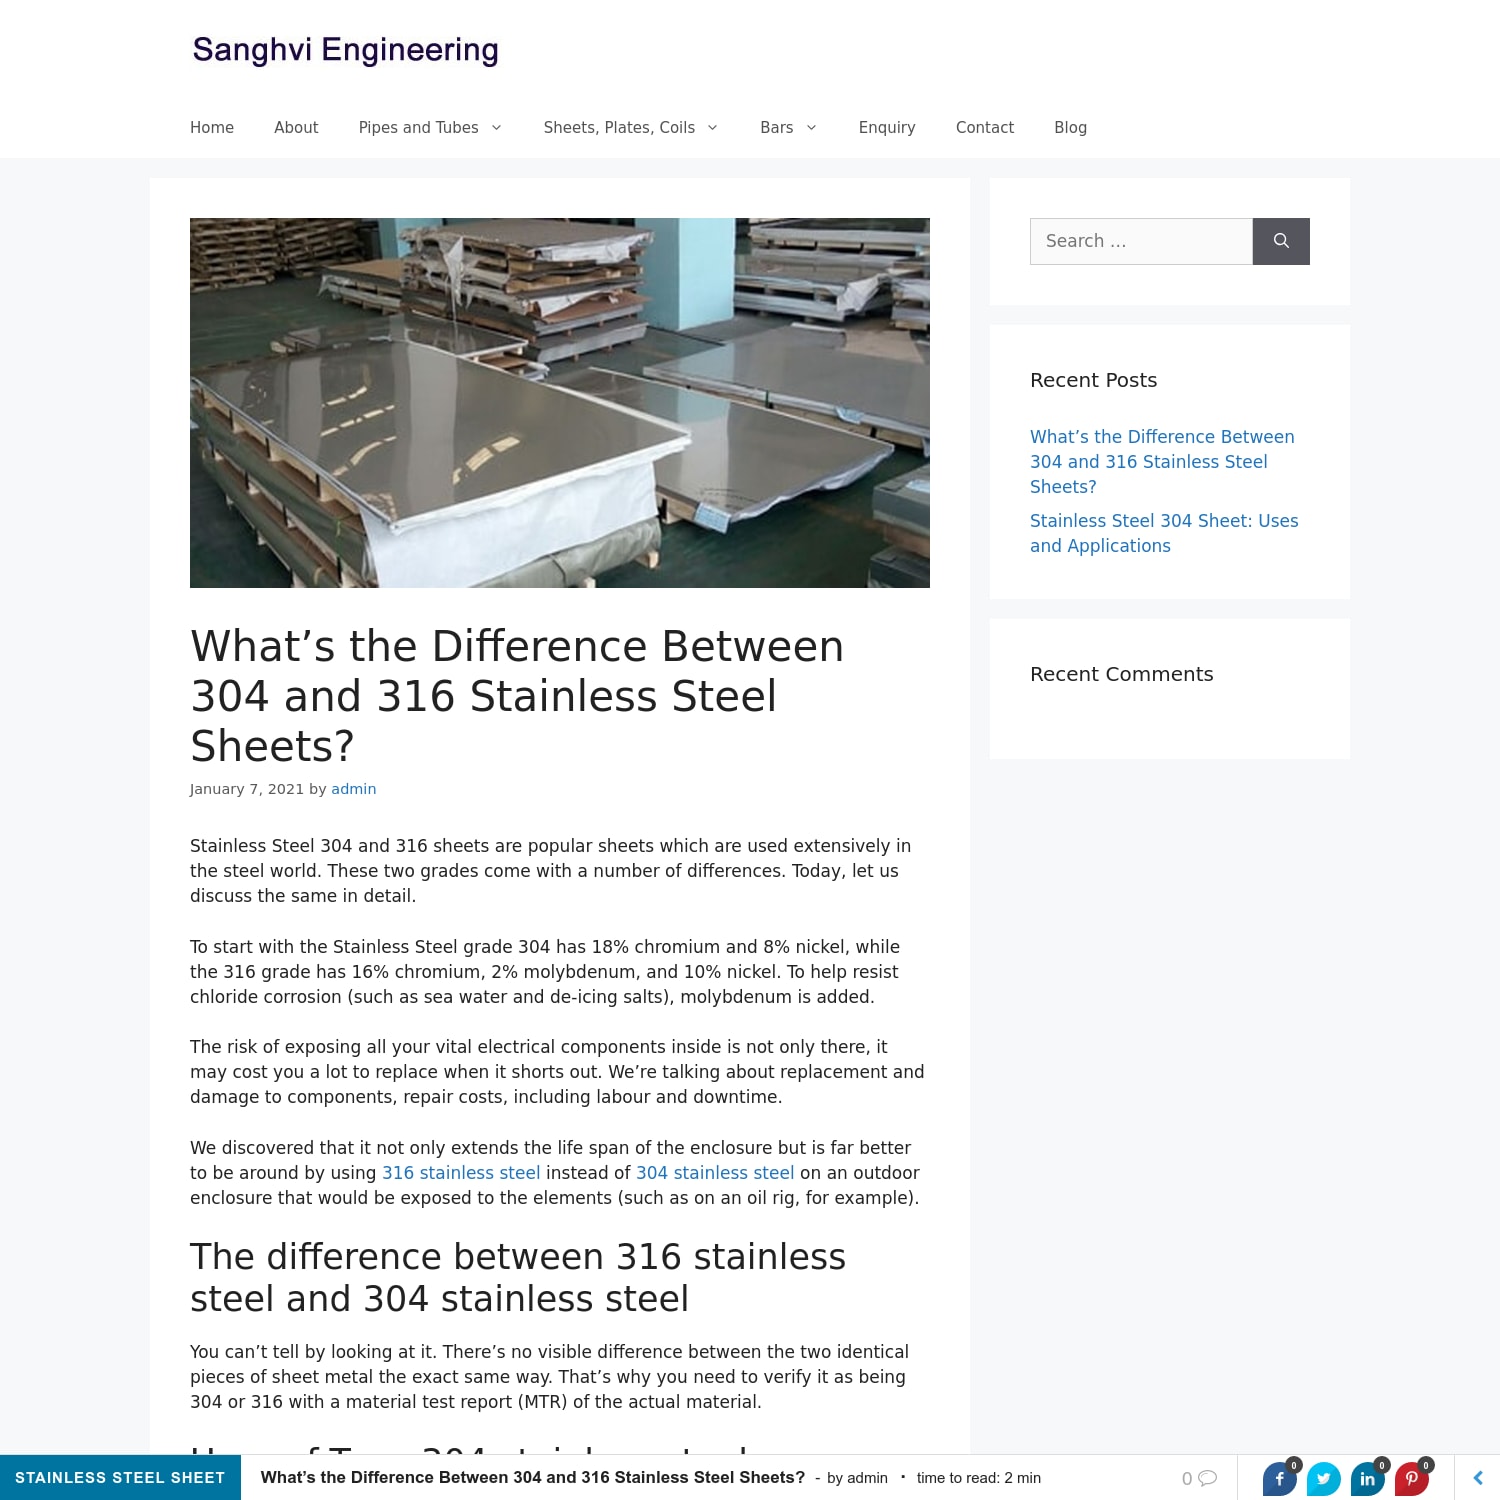 What's the Difference Between 304 and 316 Stainless Steel Sheets? - Sanghvi Engineerings Blog